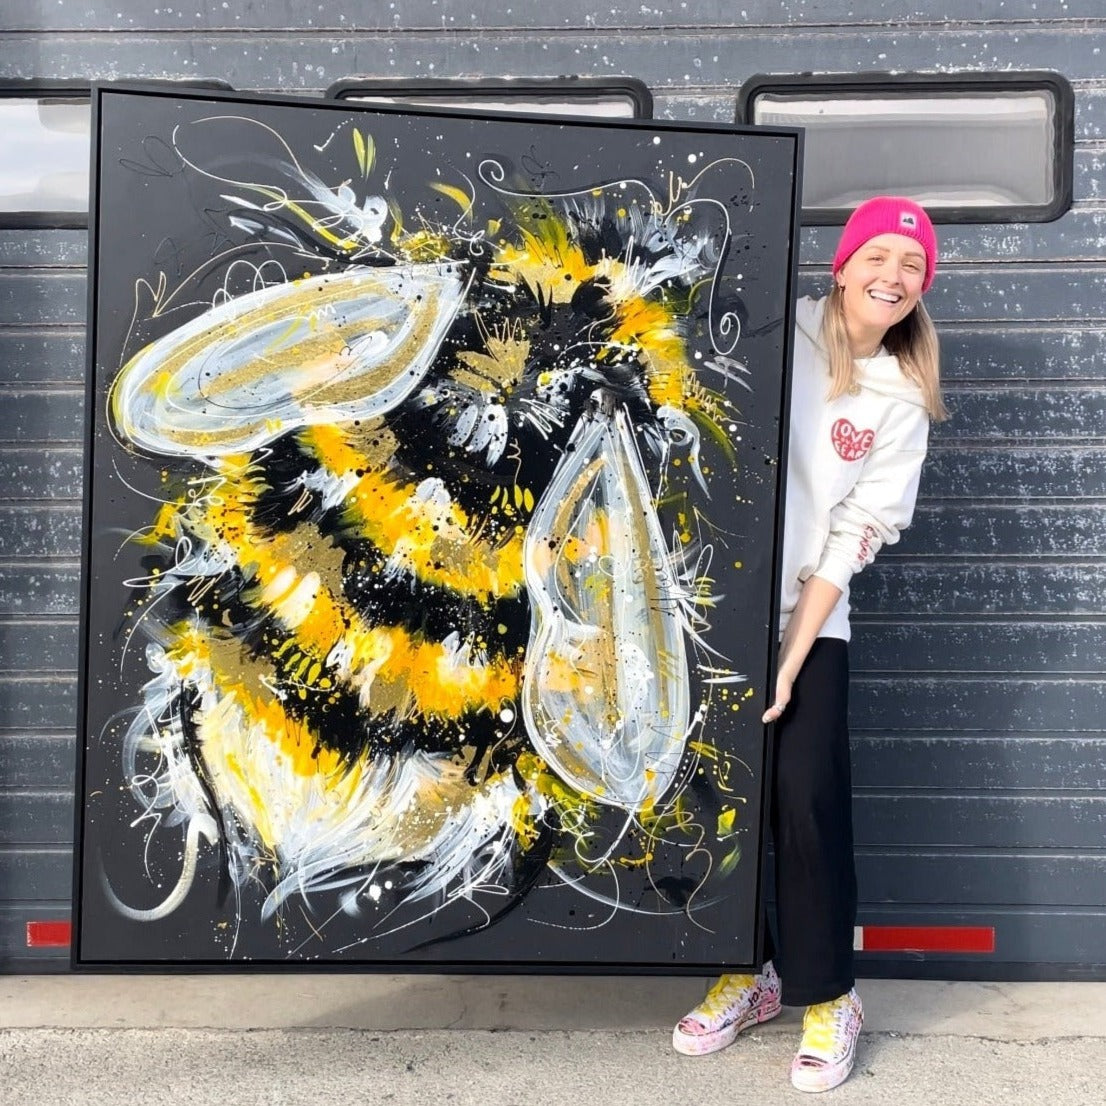 Beautiful French Graffiti Abeille (Bee) Towel. So Charming